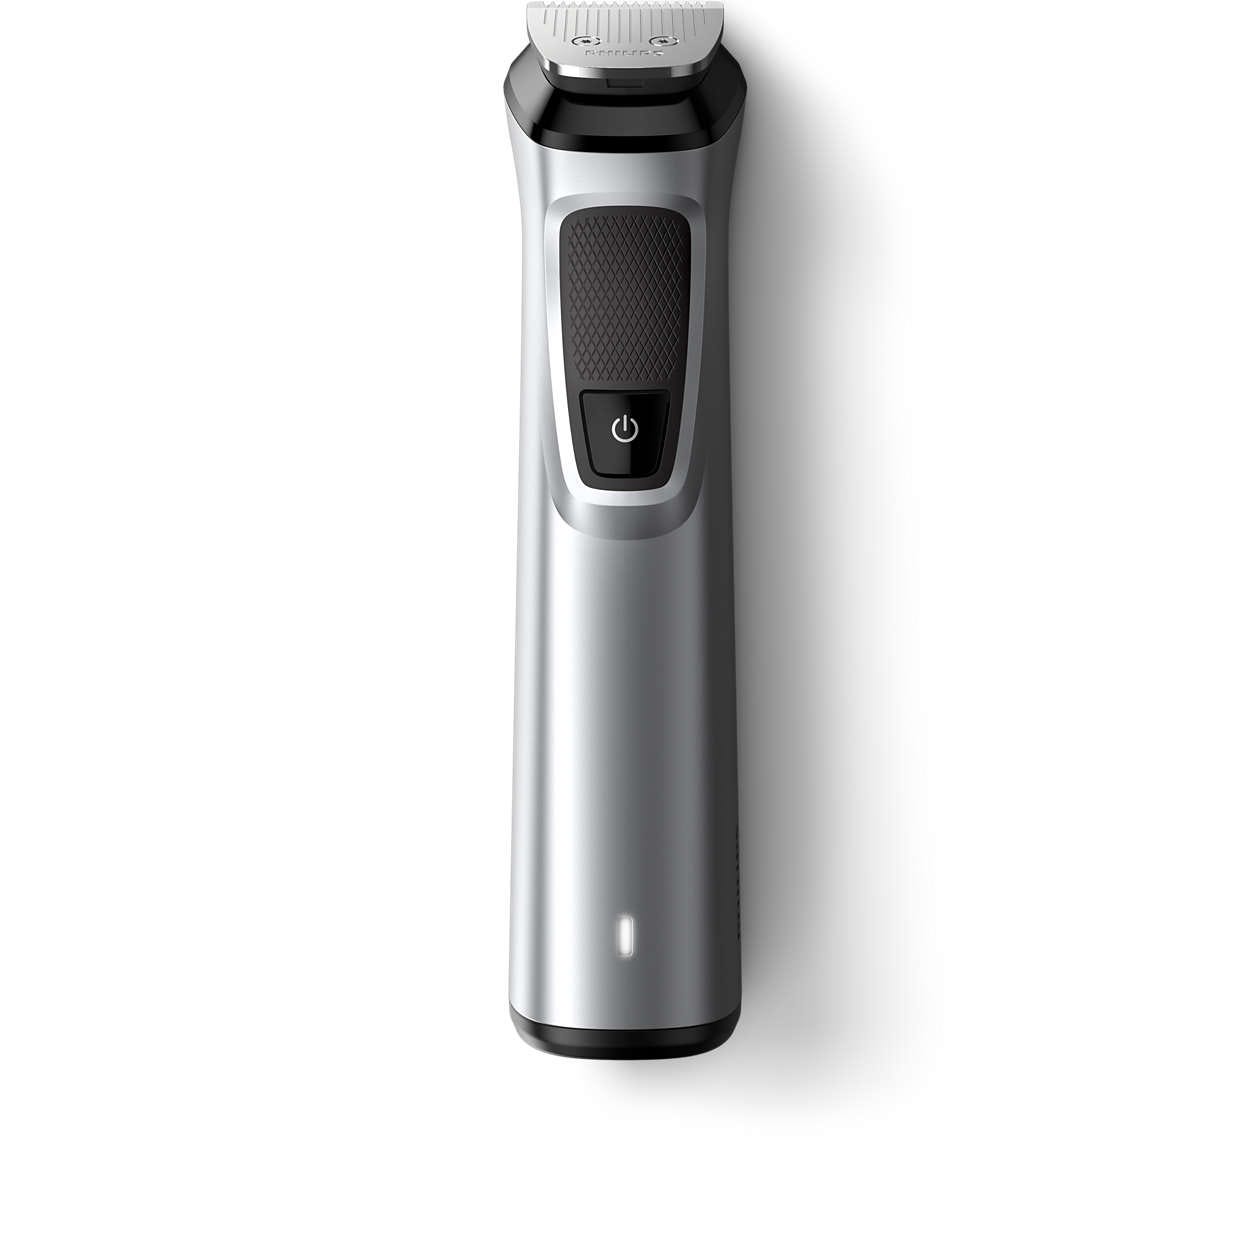 philips 7715 trimmer price